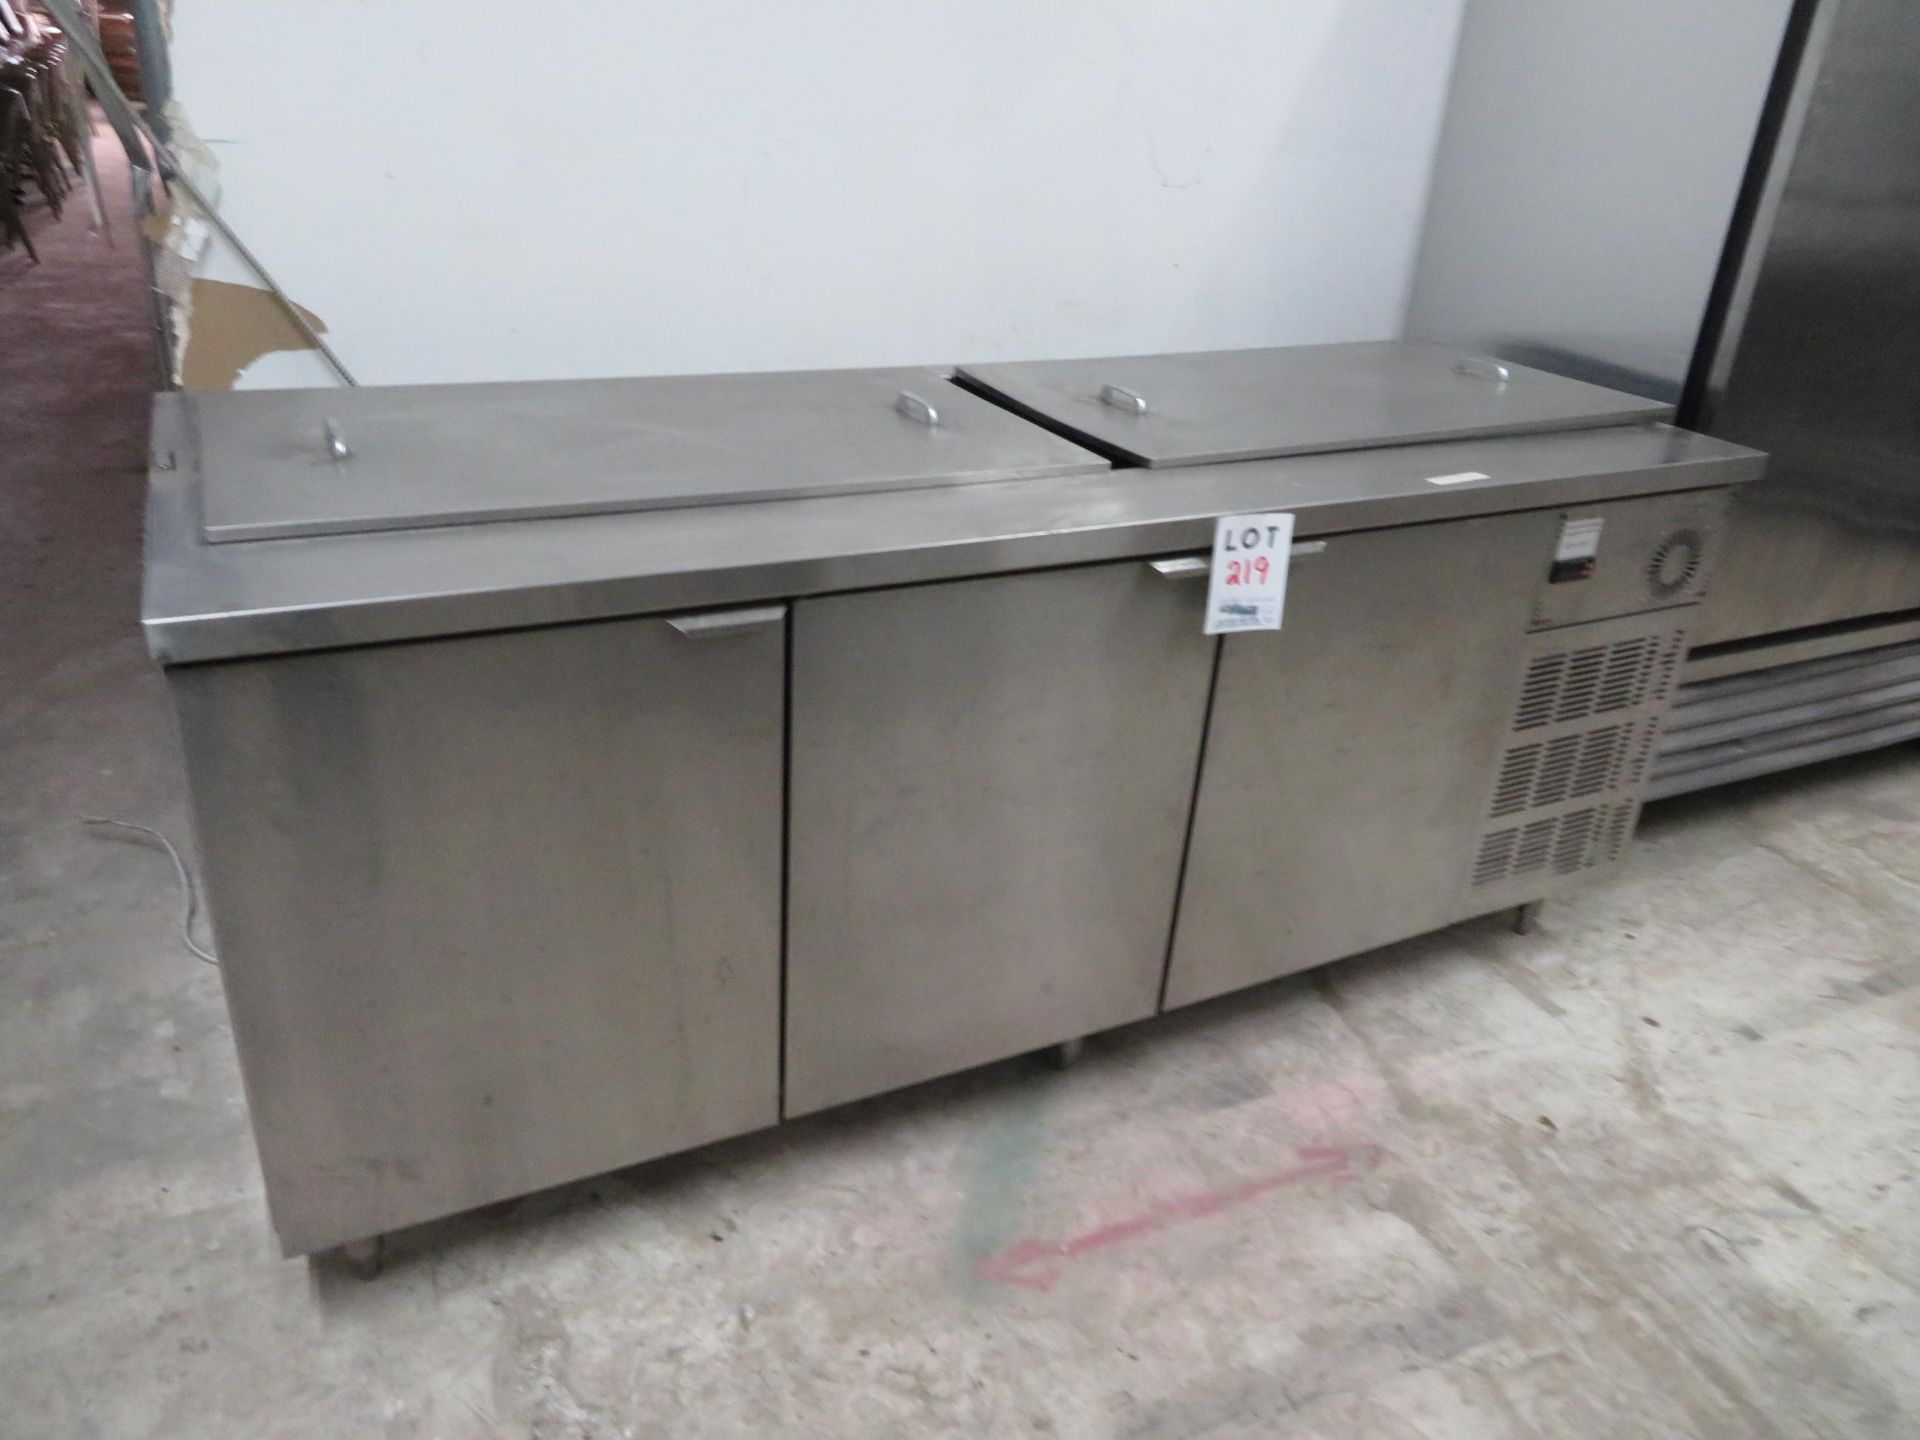 INOX FAB 3 door stainless steel refrigerated table, Mod # TSBCI-84-32 approx. 84"w x32"d x 36"h